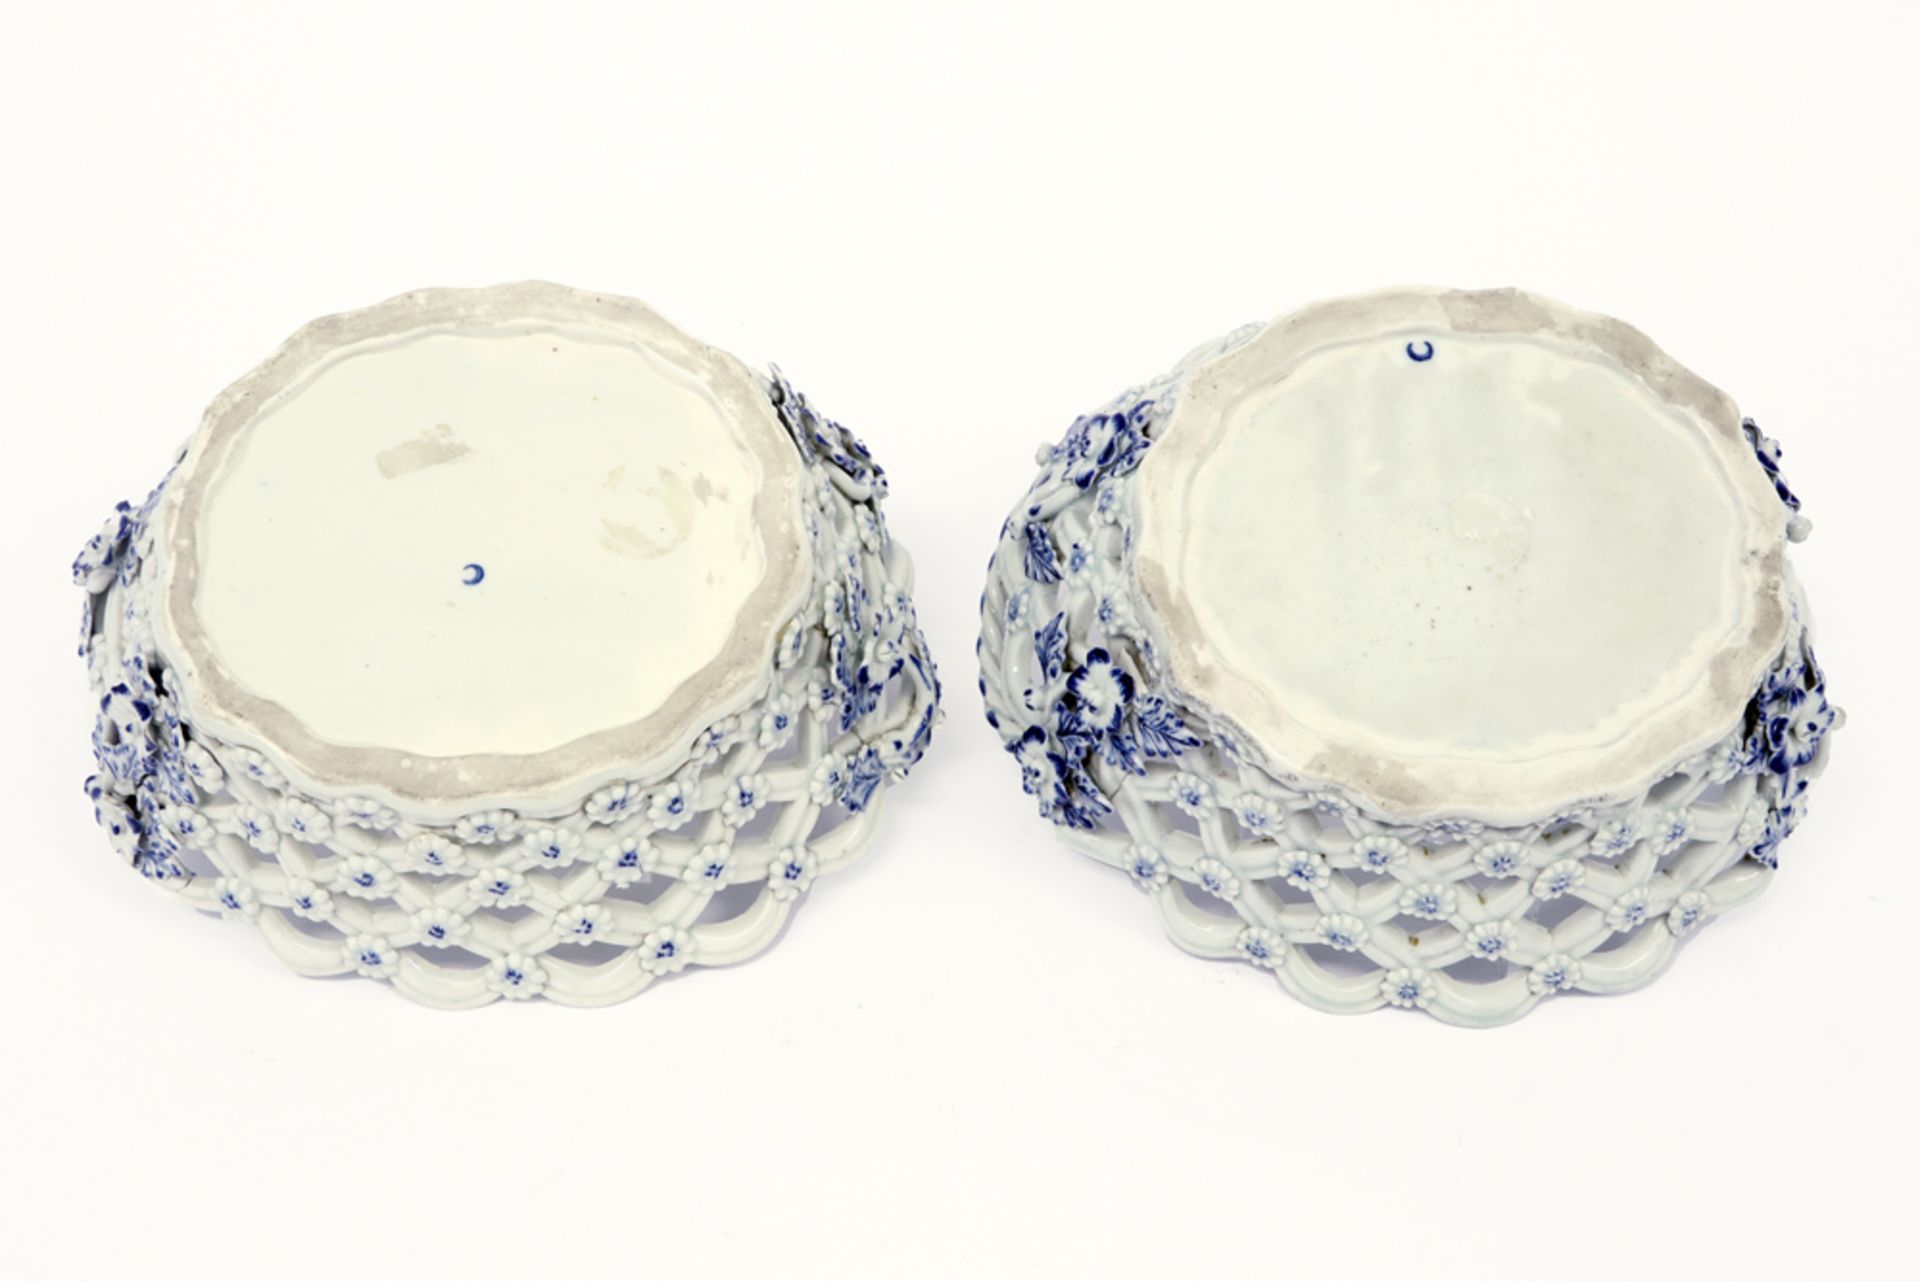 pair of 18th Cent. English Worcester marked baskets in open work ceramic with a blue-white flower - Image 4 of 5